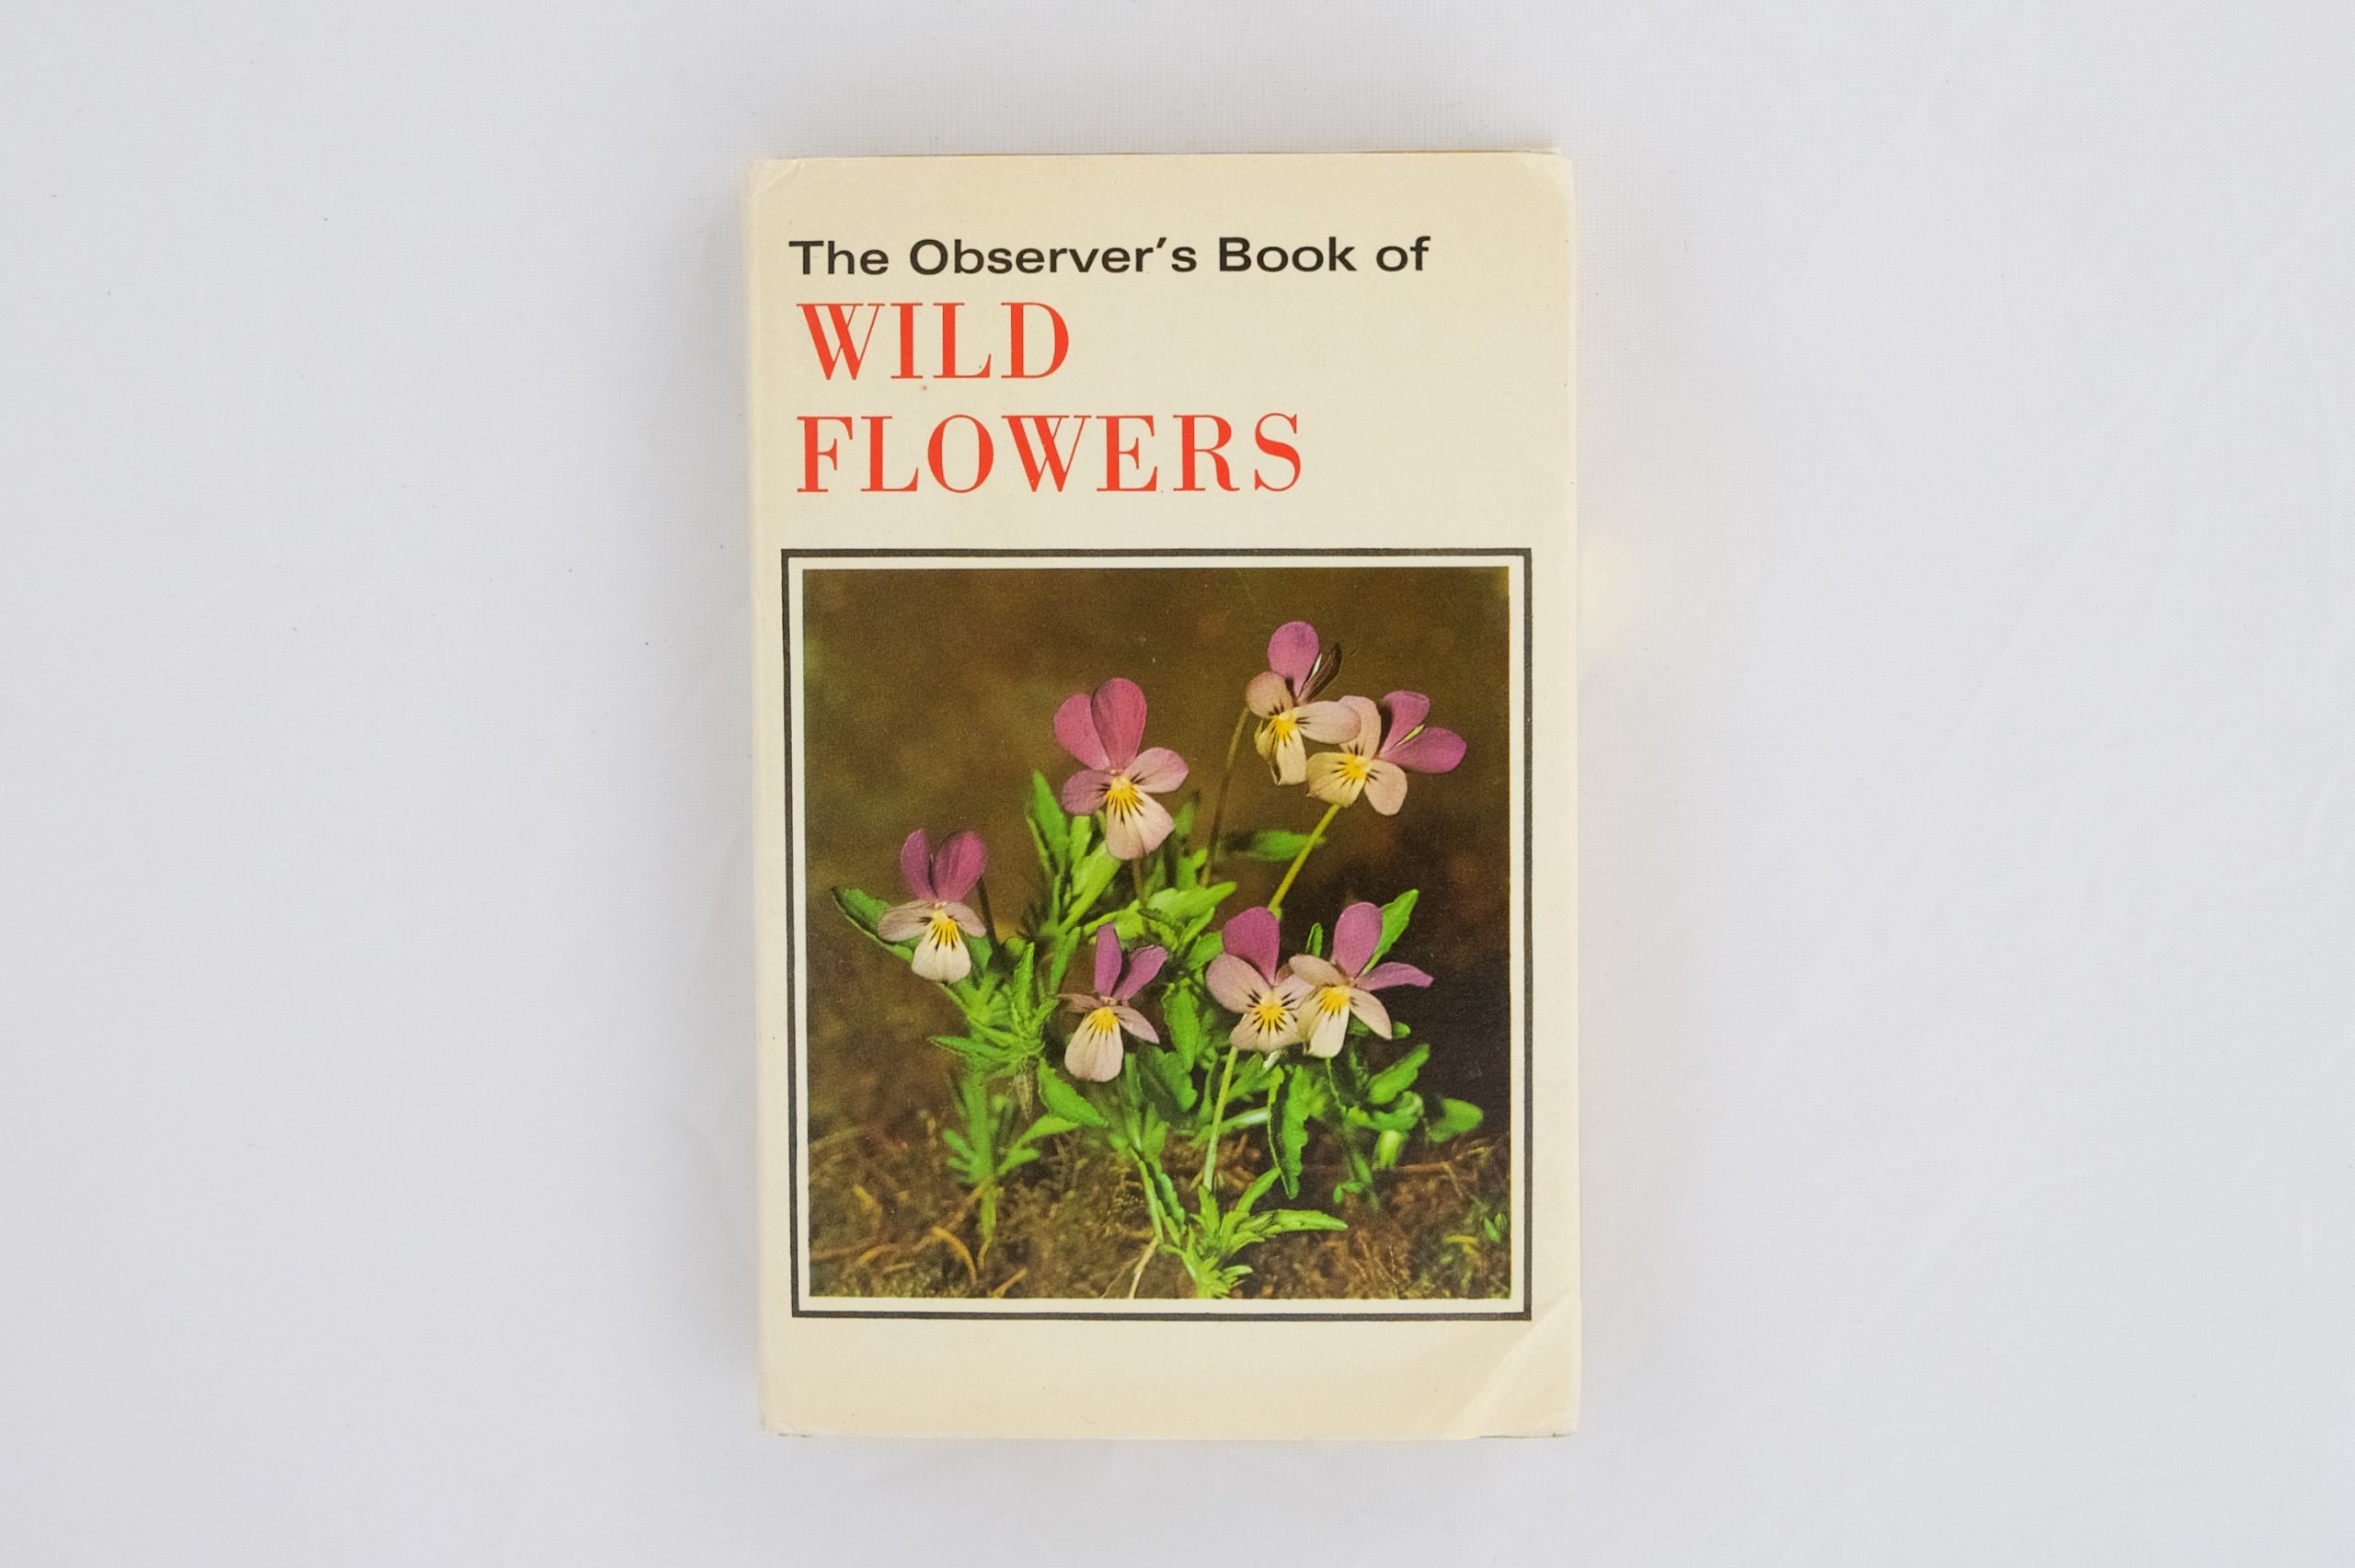 The observers book of wild flowers | Save the Children Shop